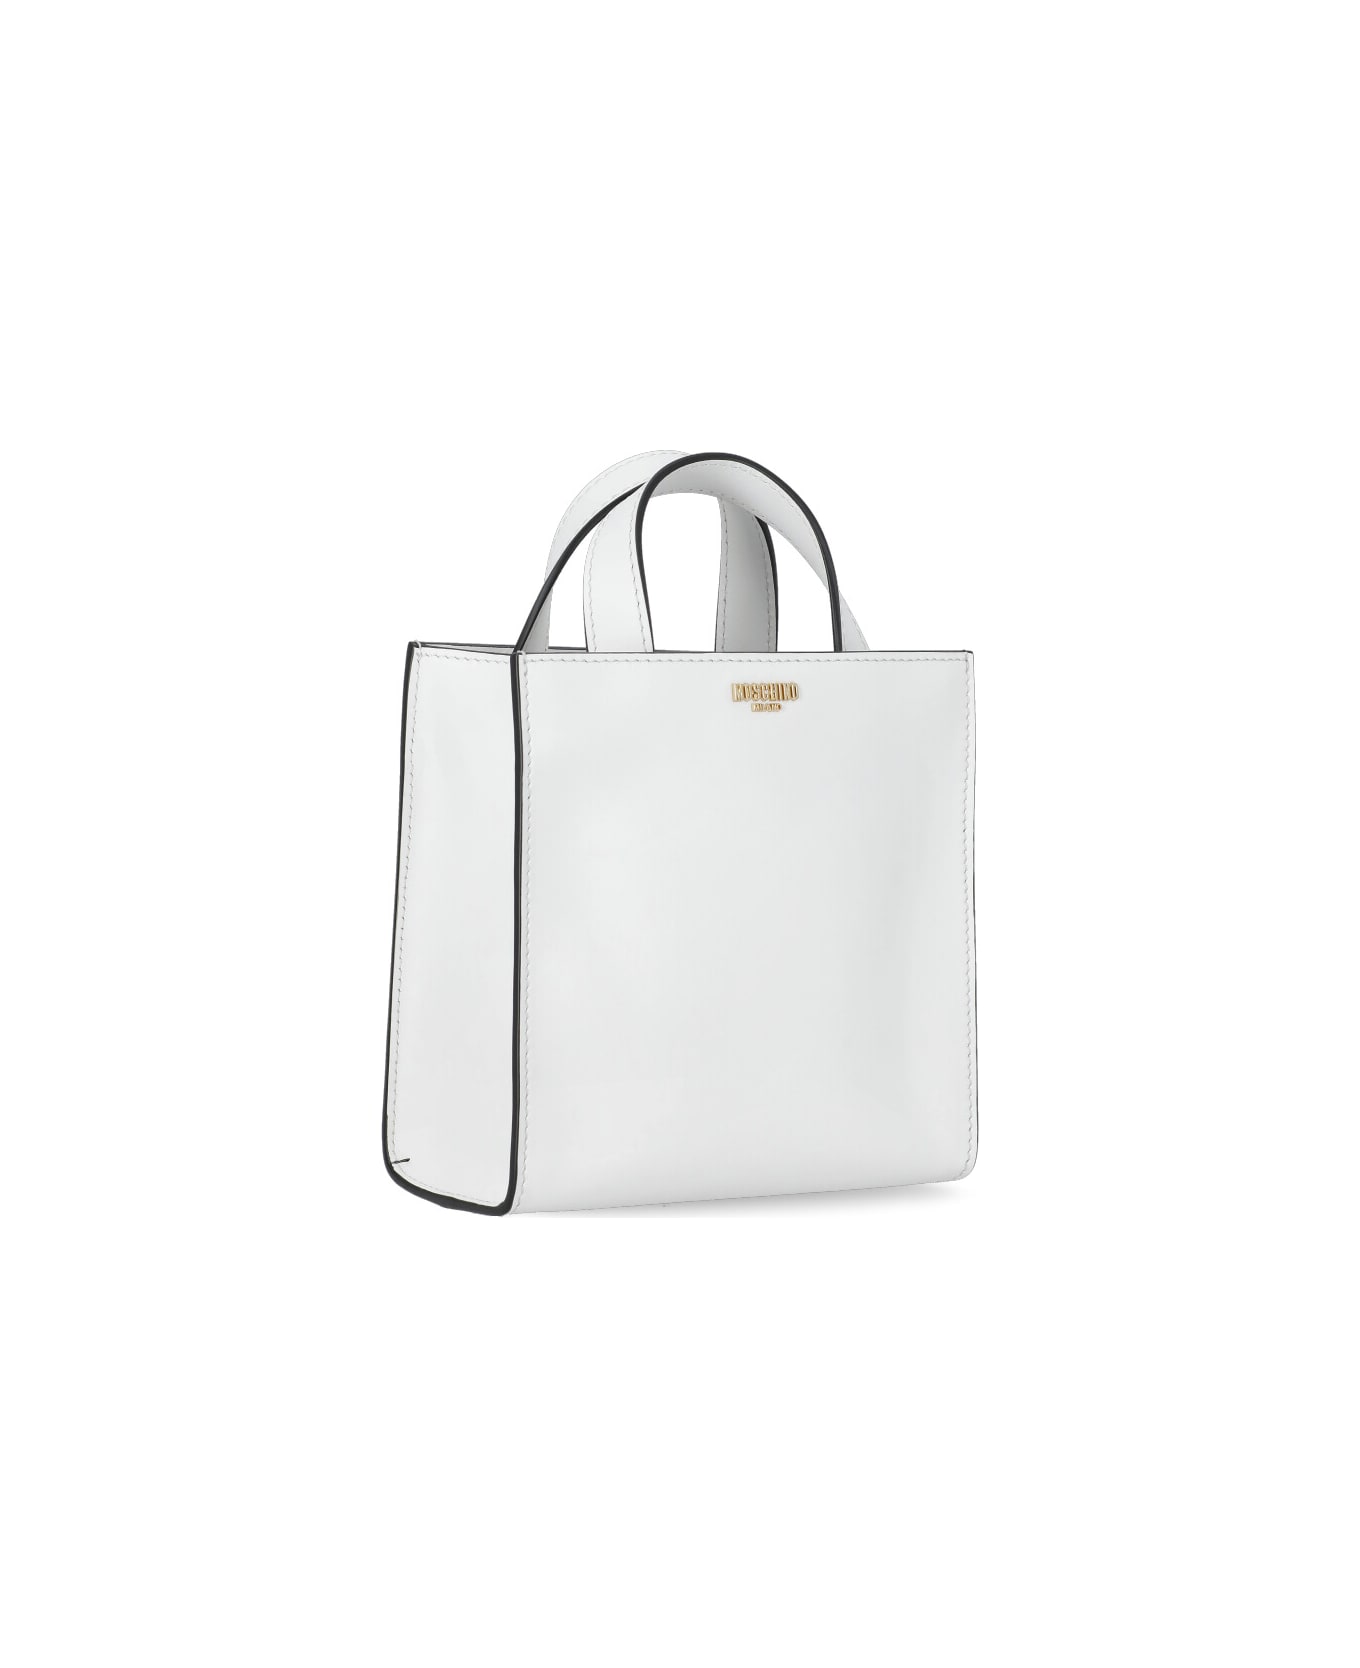 Moschino Leather Shoulder Bag - White トートバッグ